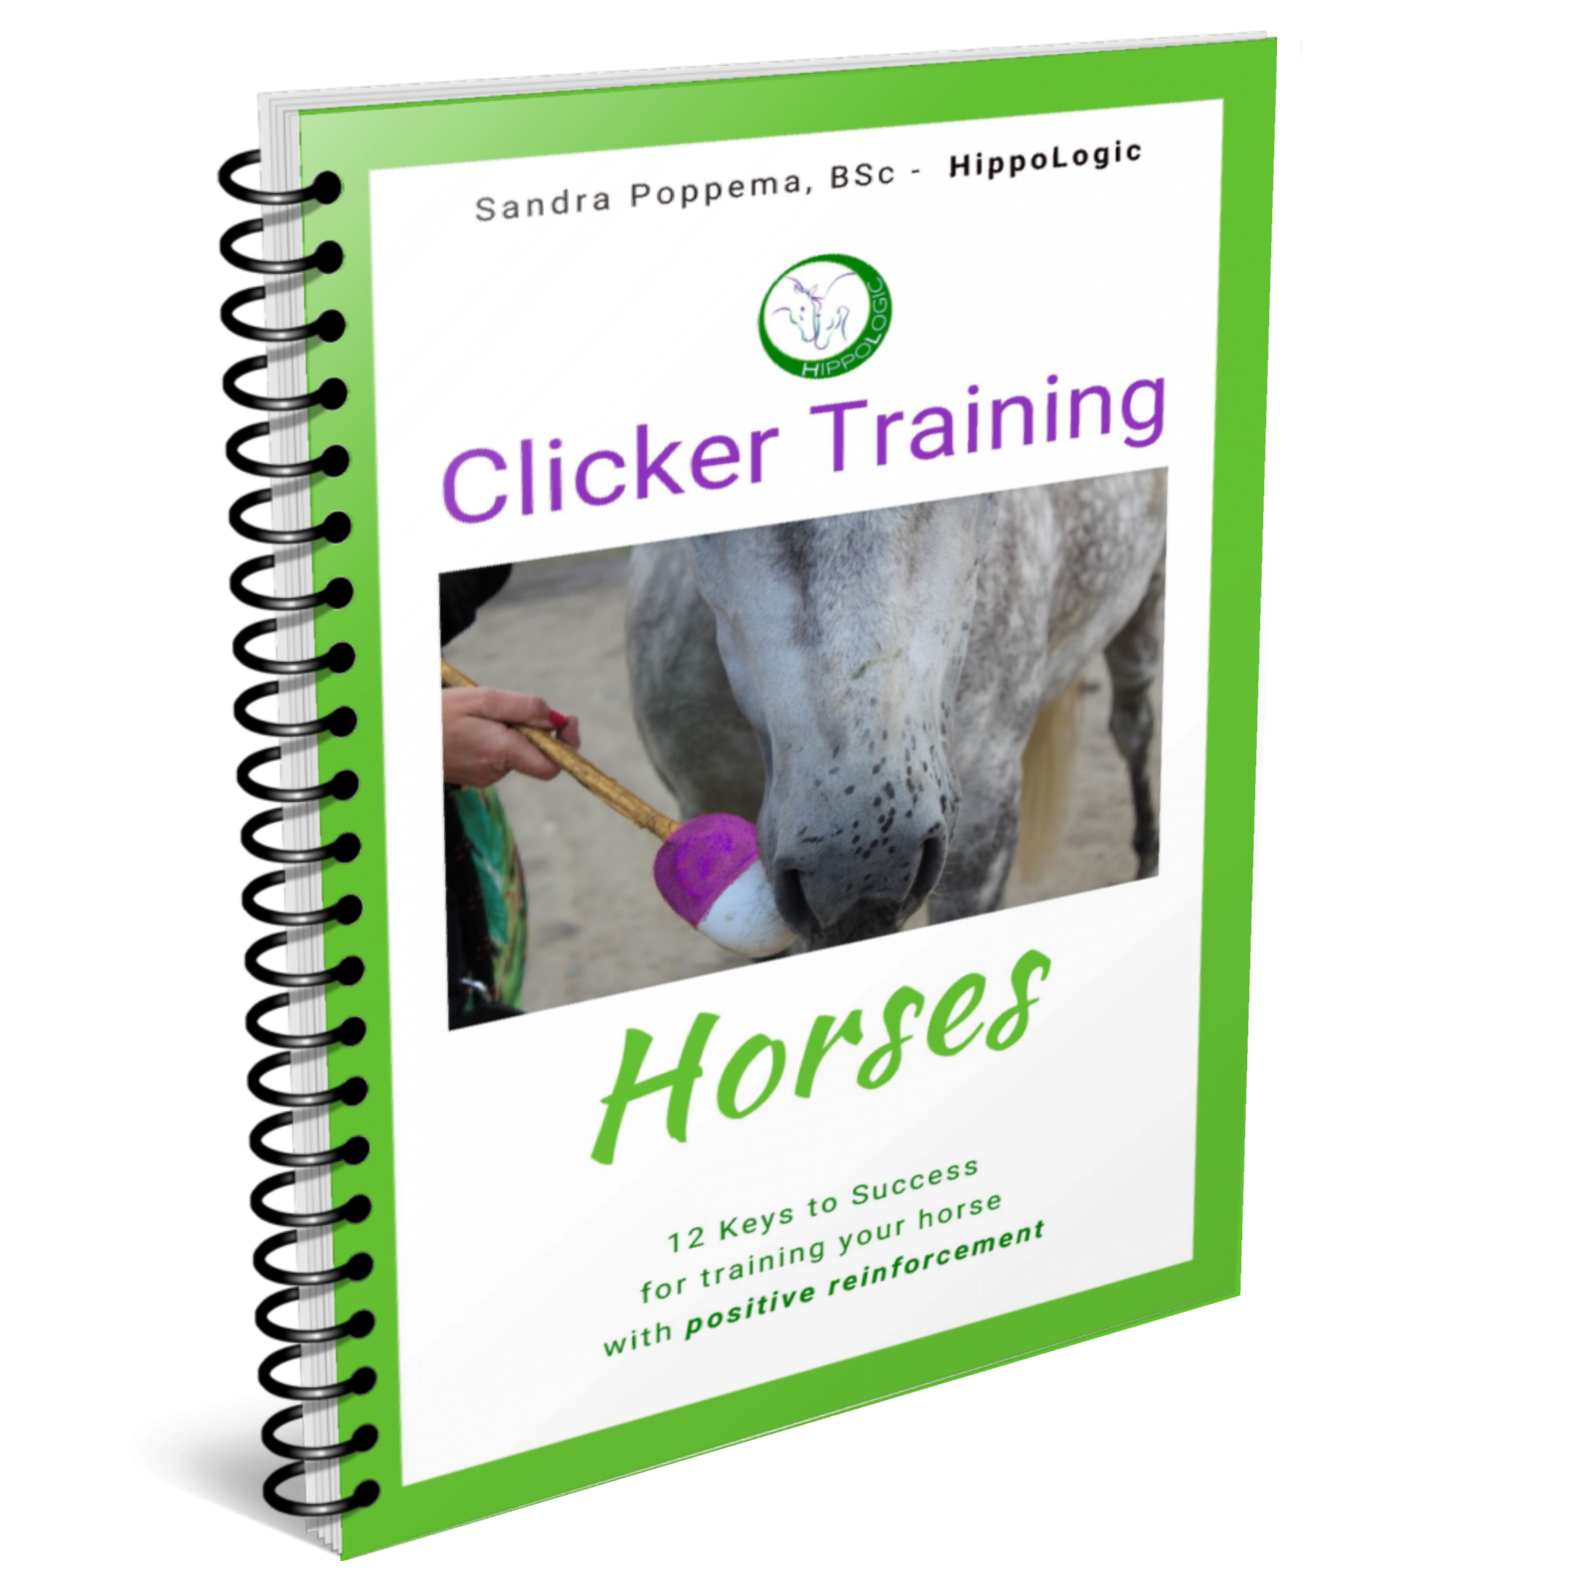 Clicker Training For Horses your Key to Success in Positive reinforcement by Sandra Poppema Hippologic